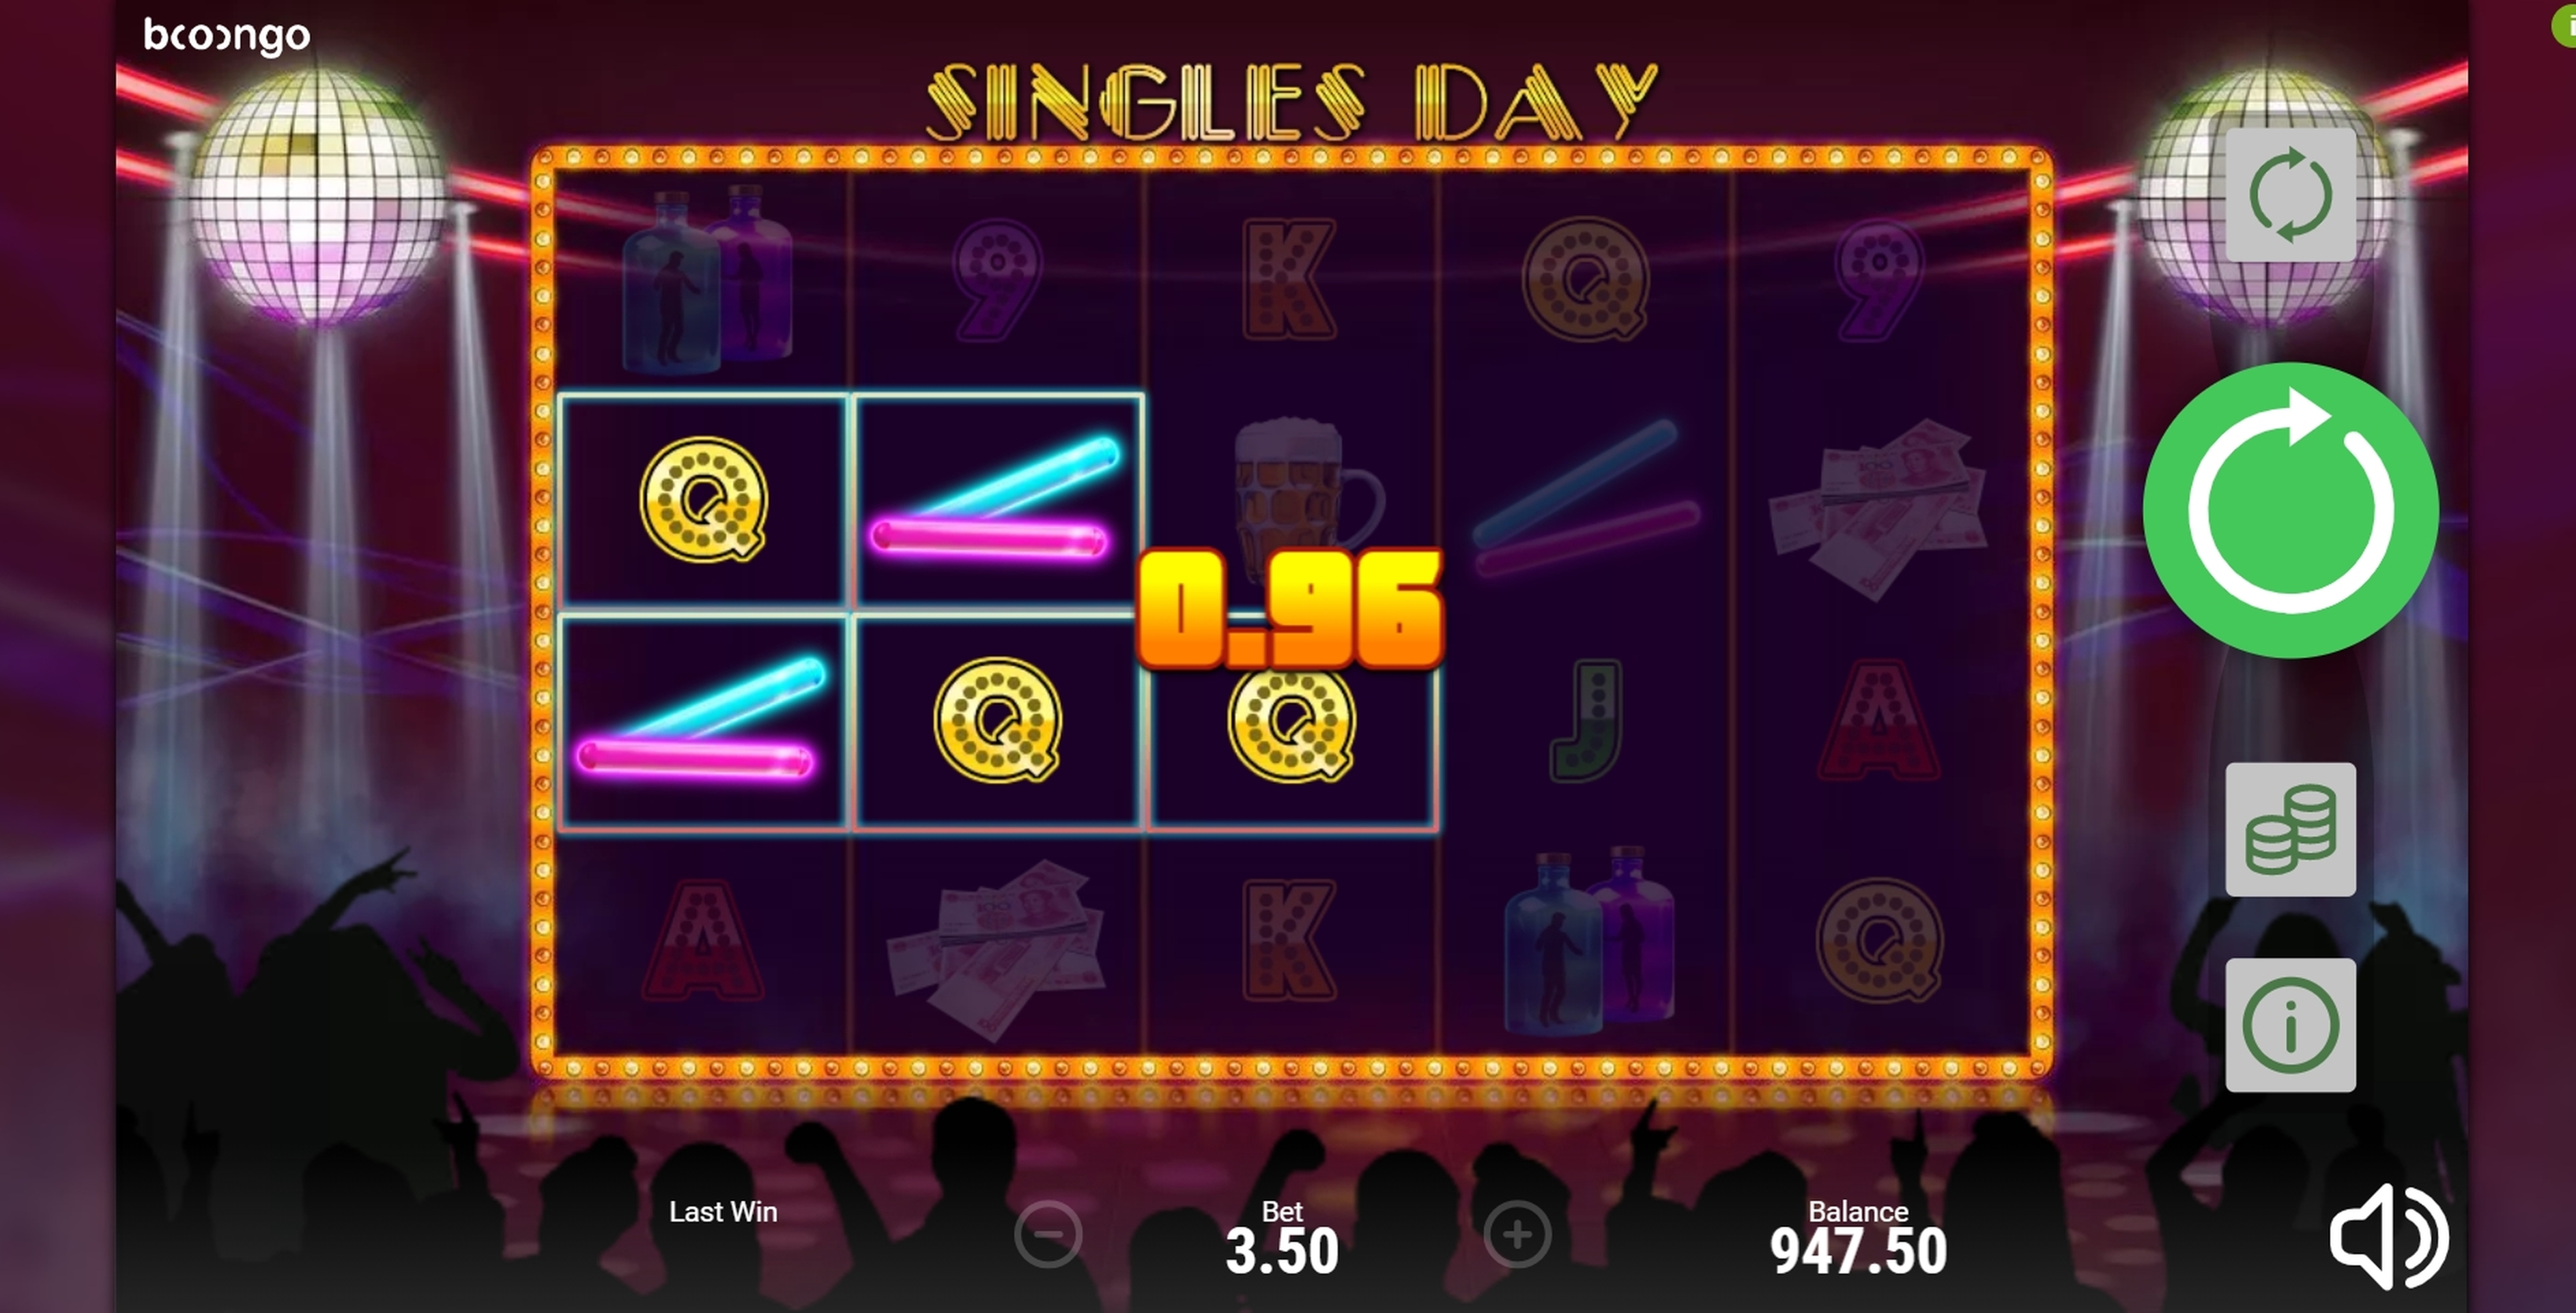 Win Money in Singles Day Free Slot Game by Booongo Gaming